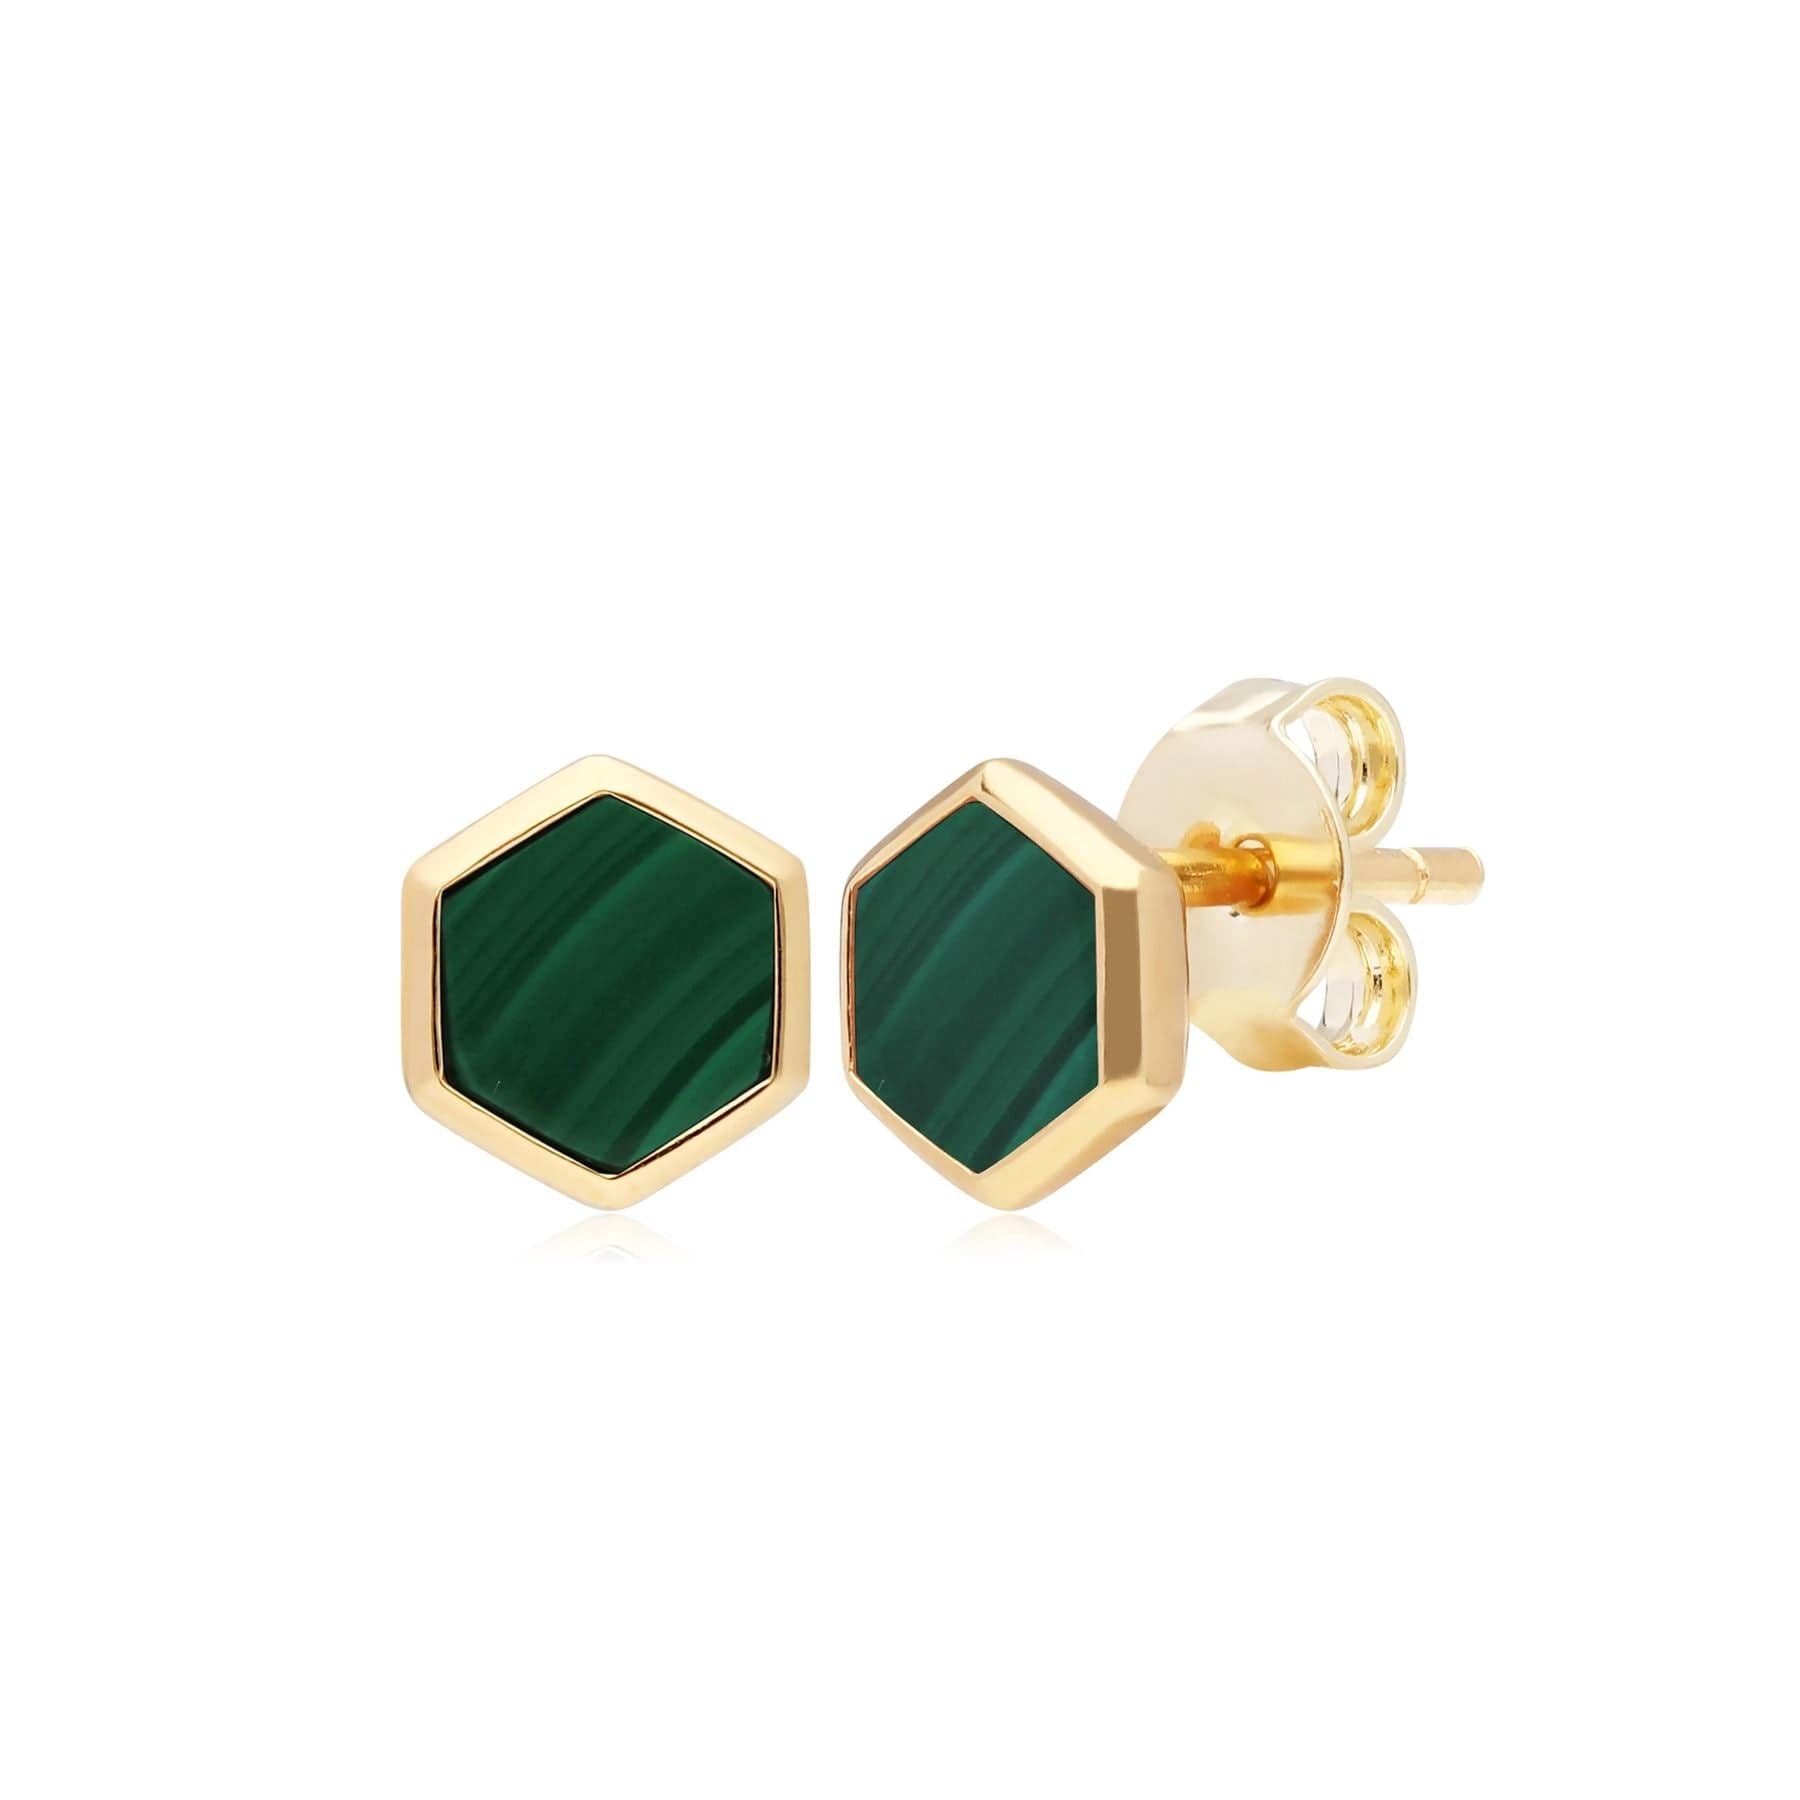 Micro Statement Malachite Stud Earrings in Gold Plated 925 Sterling Silver